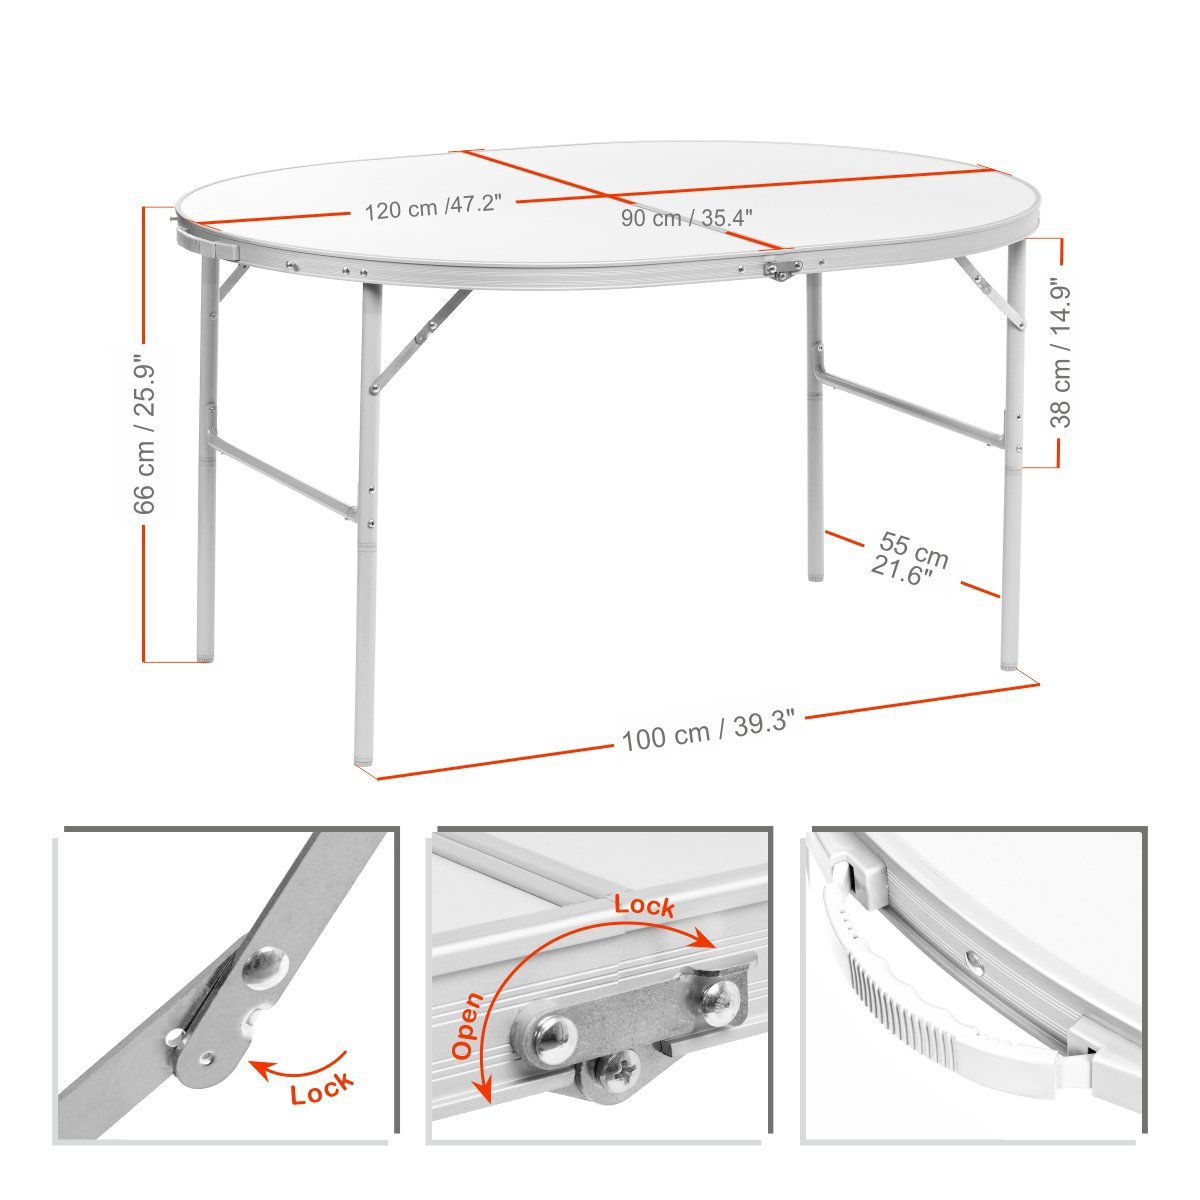 The Oval Portable Aluminum Folding Camping Table is 26 inches high, 39 inches long and 21.6 inches wide. The table top is 47*35.5 inches